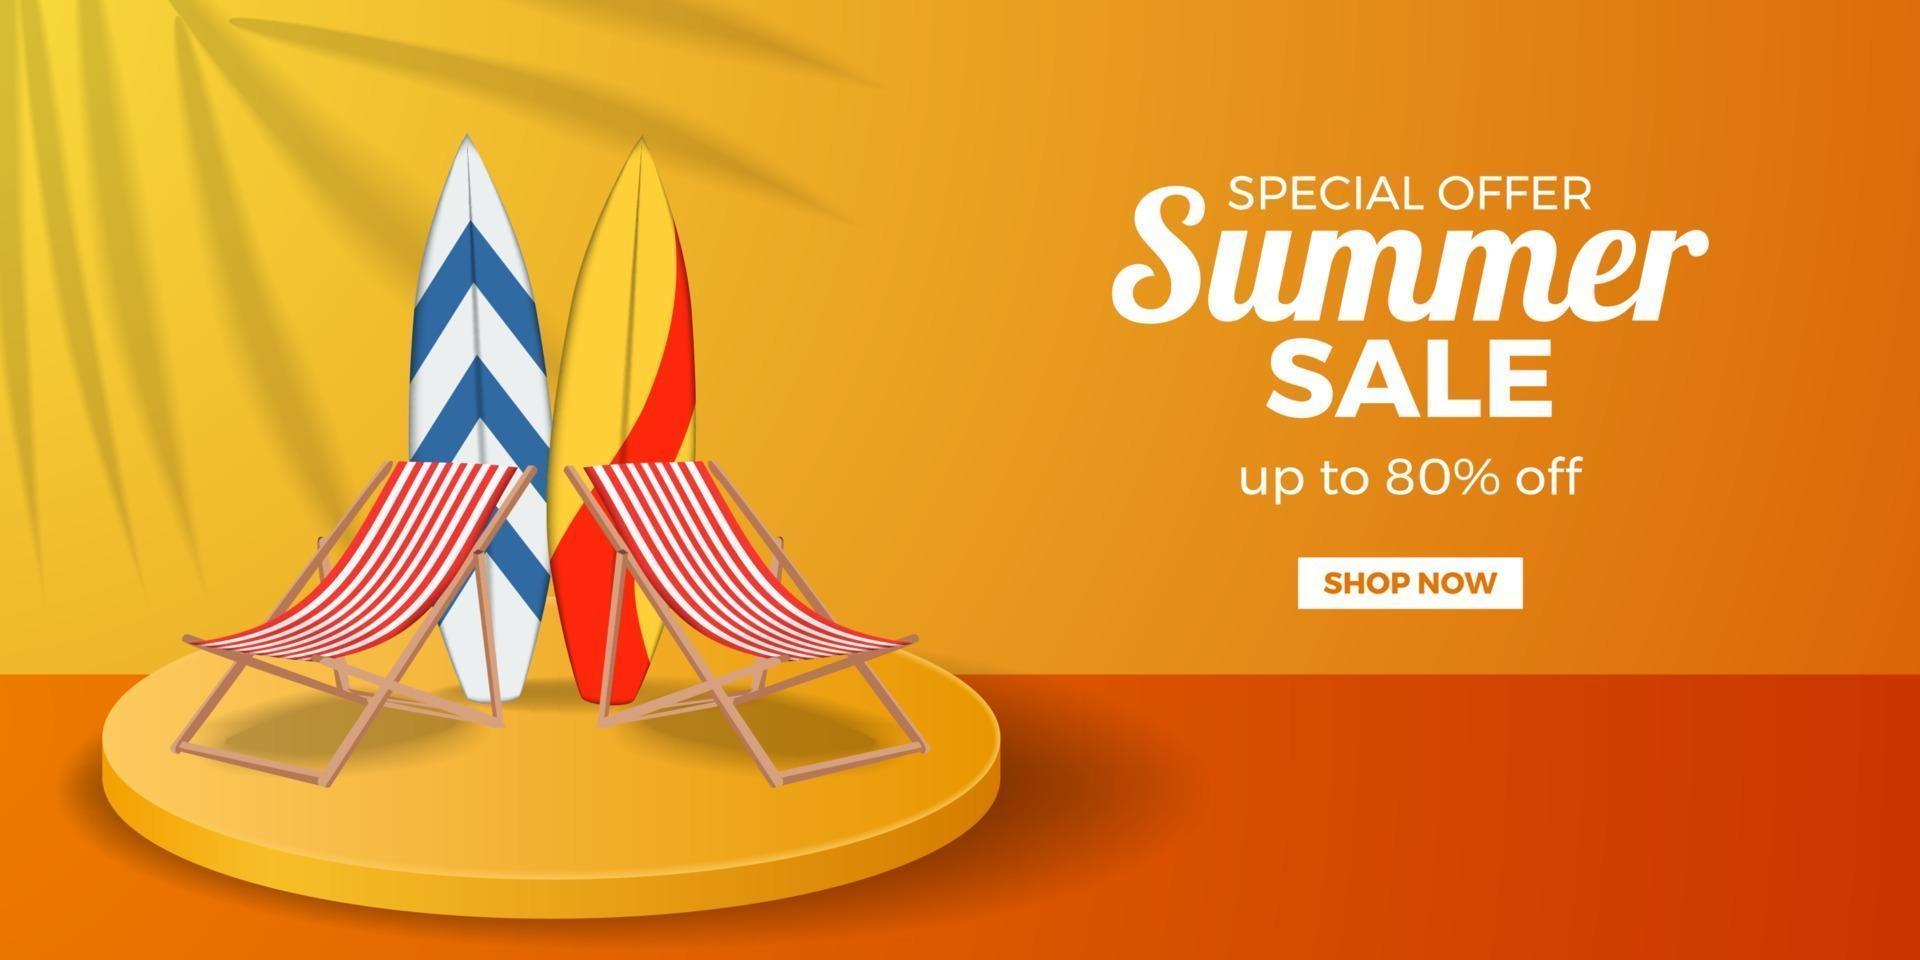 Summer sale offer banner promotion with relax folded chair and surfboard on cylinder podium product display with orange background vector